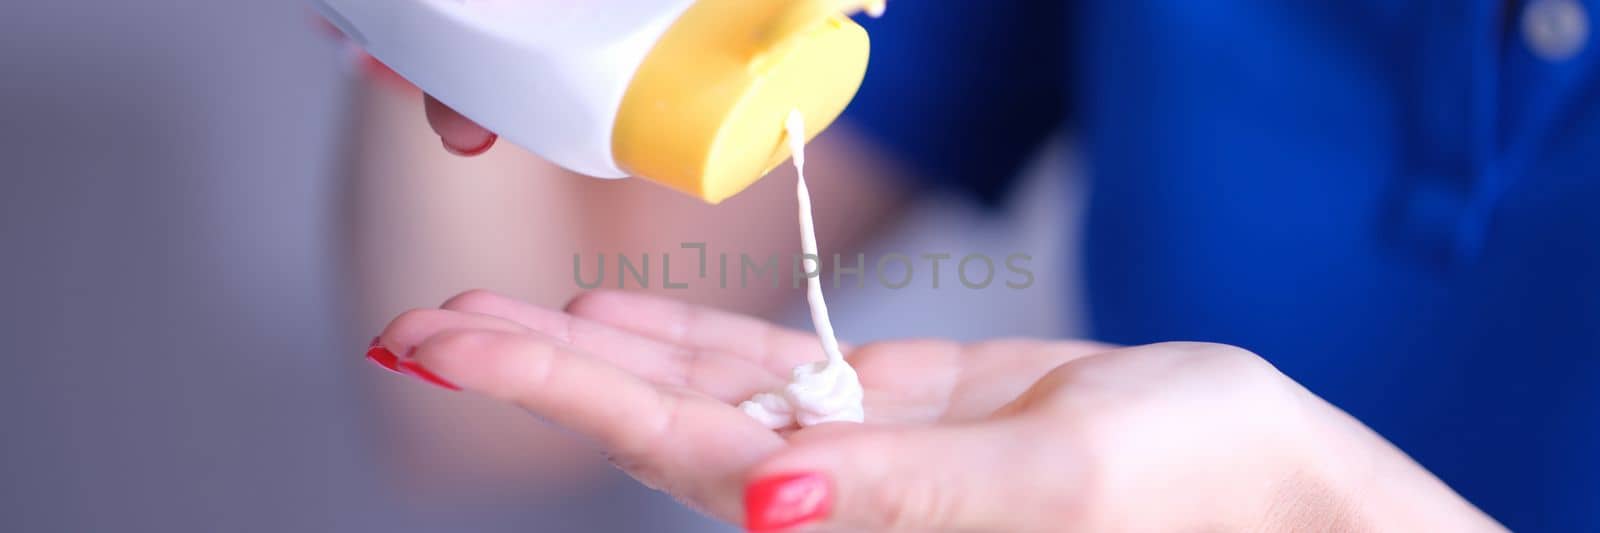 Woman pours body care lotion or sunscreen from bottle into hand. Moisturizing and protecting skin concept